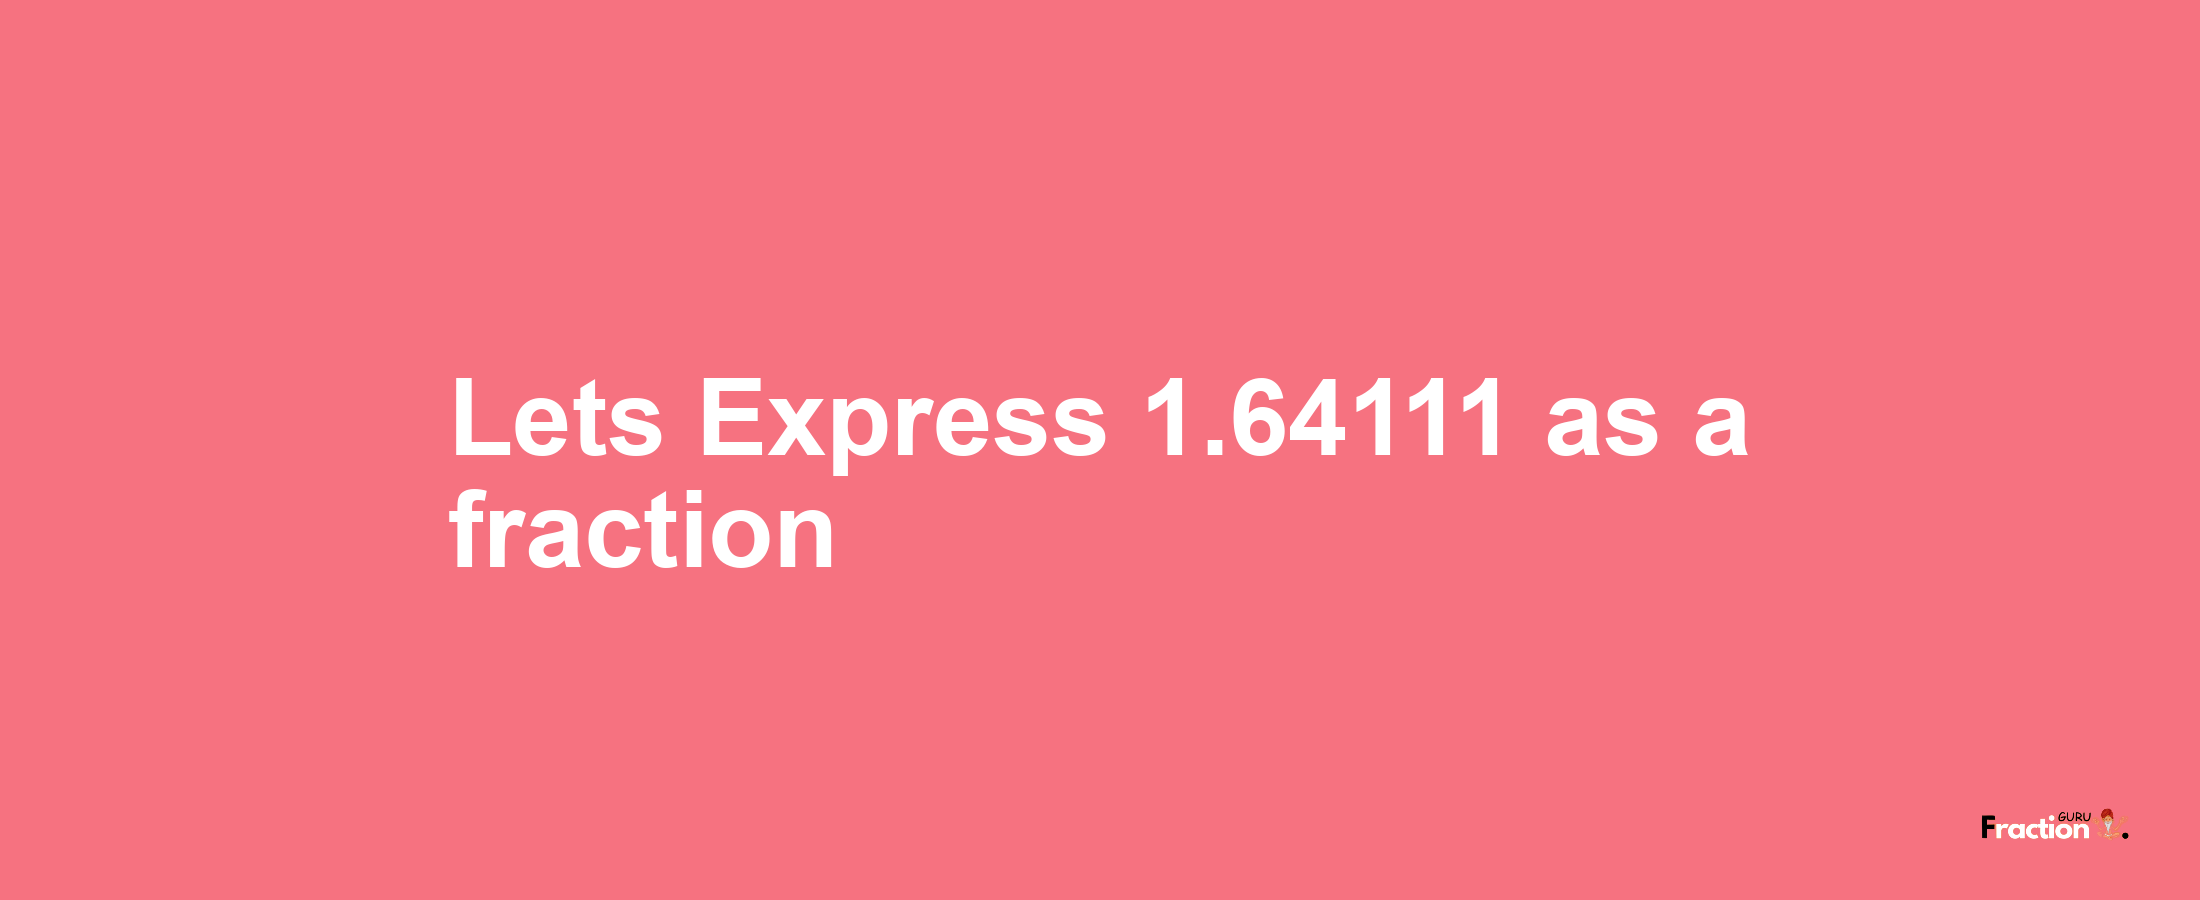 Lets Express 1.64111 as afraction